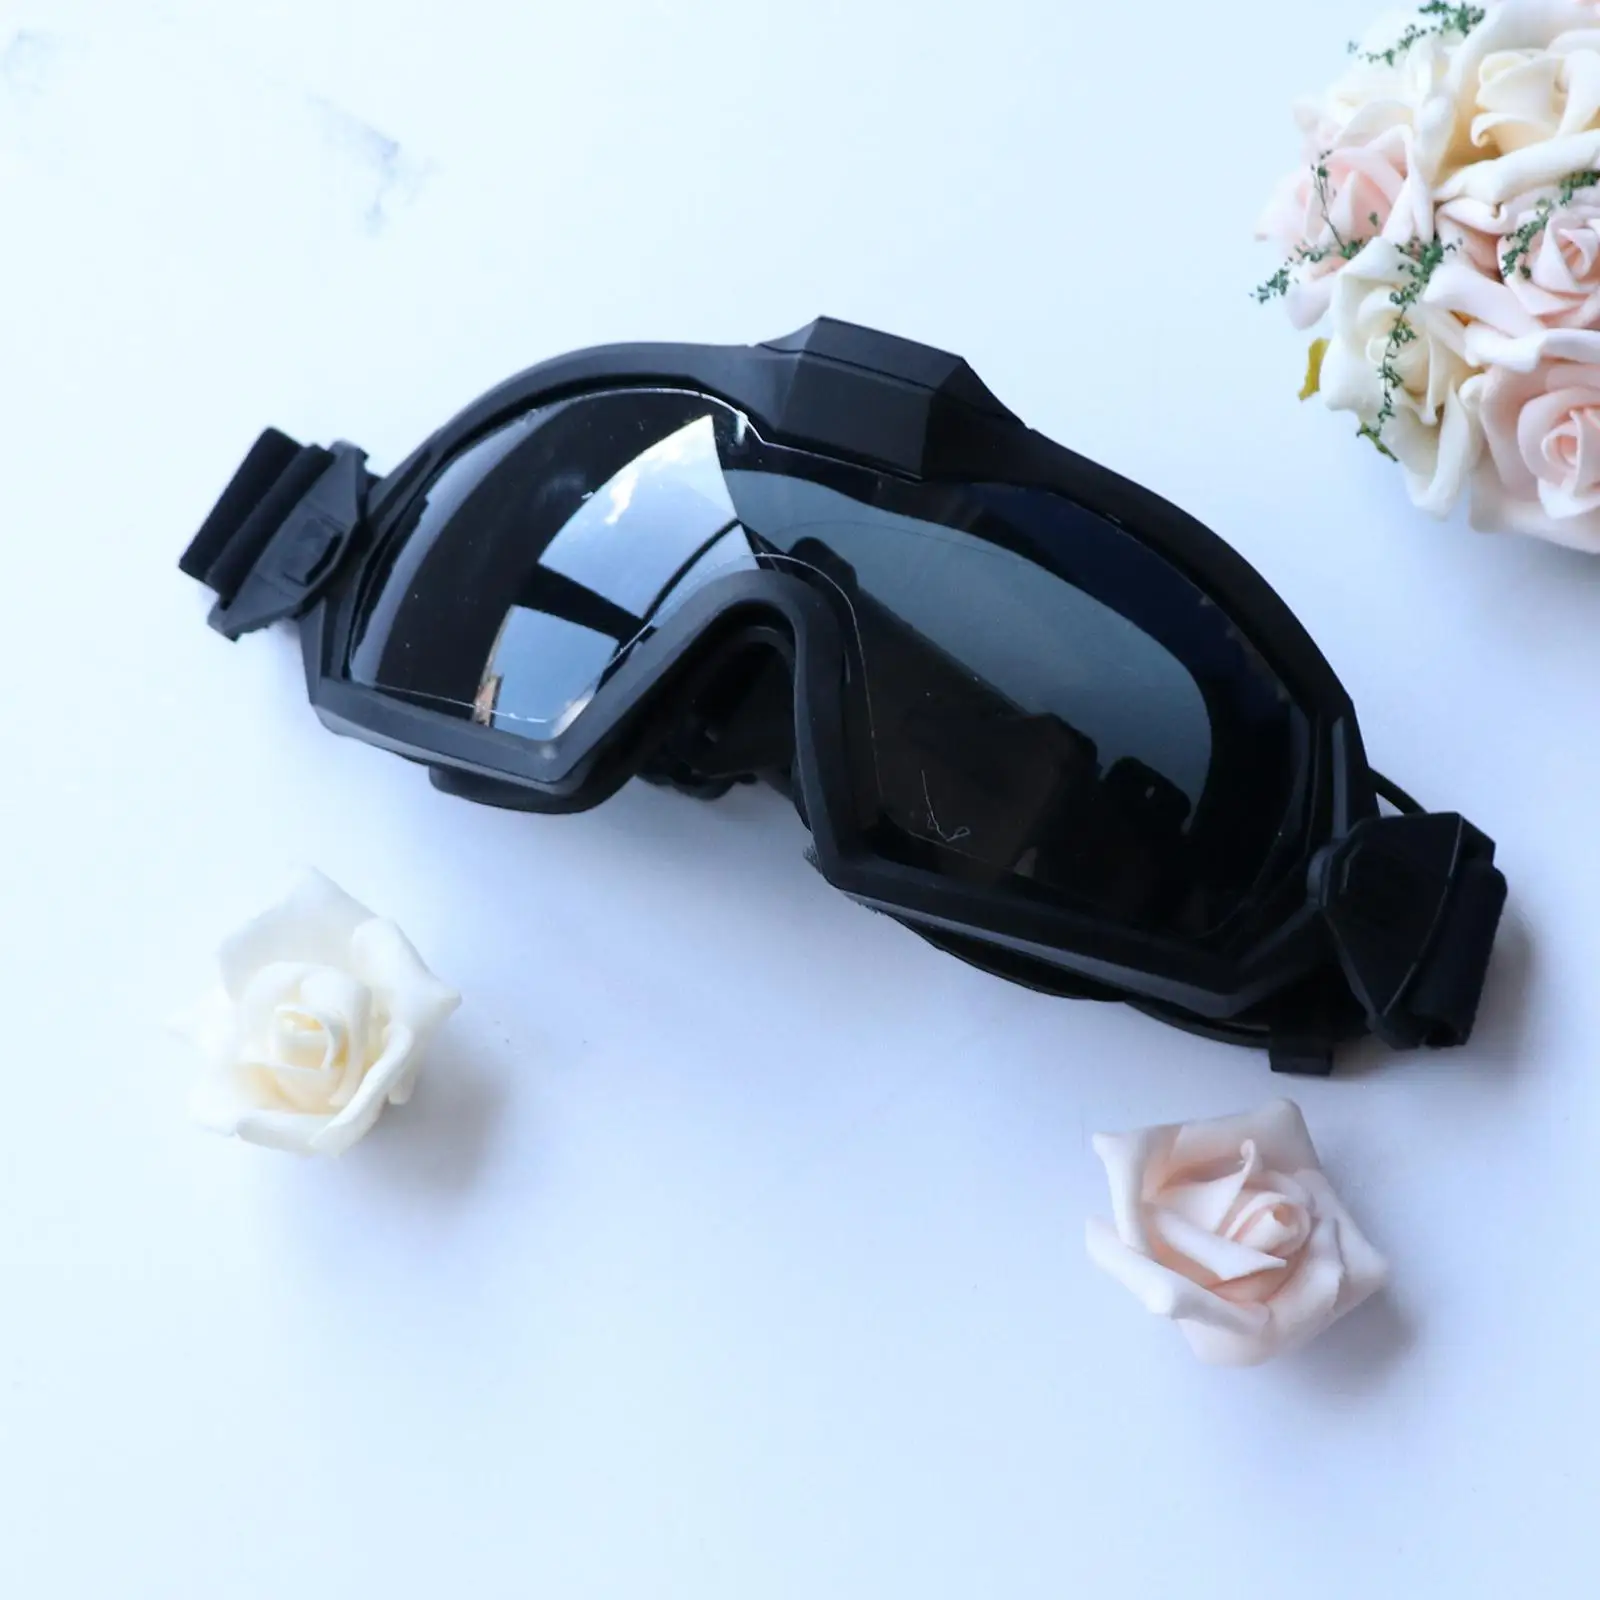 Anti-Shocks with Fan,400 Anti-Fog  Safetys Glasses with 2 Interchangeable Lens for Hunting Bike Riding